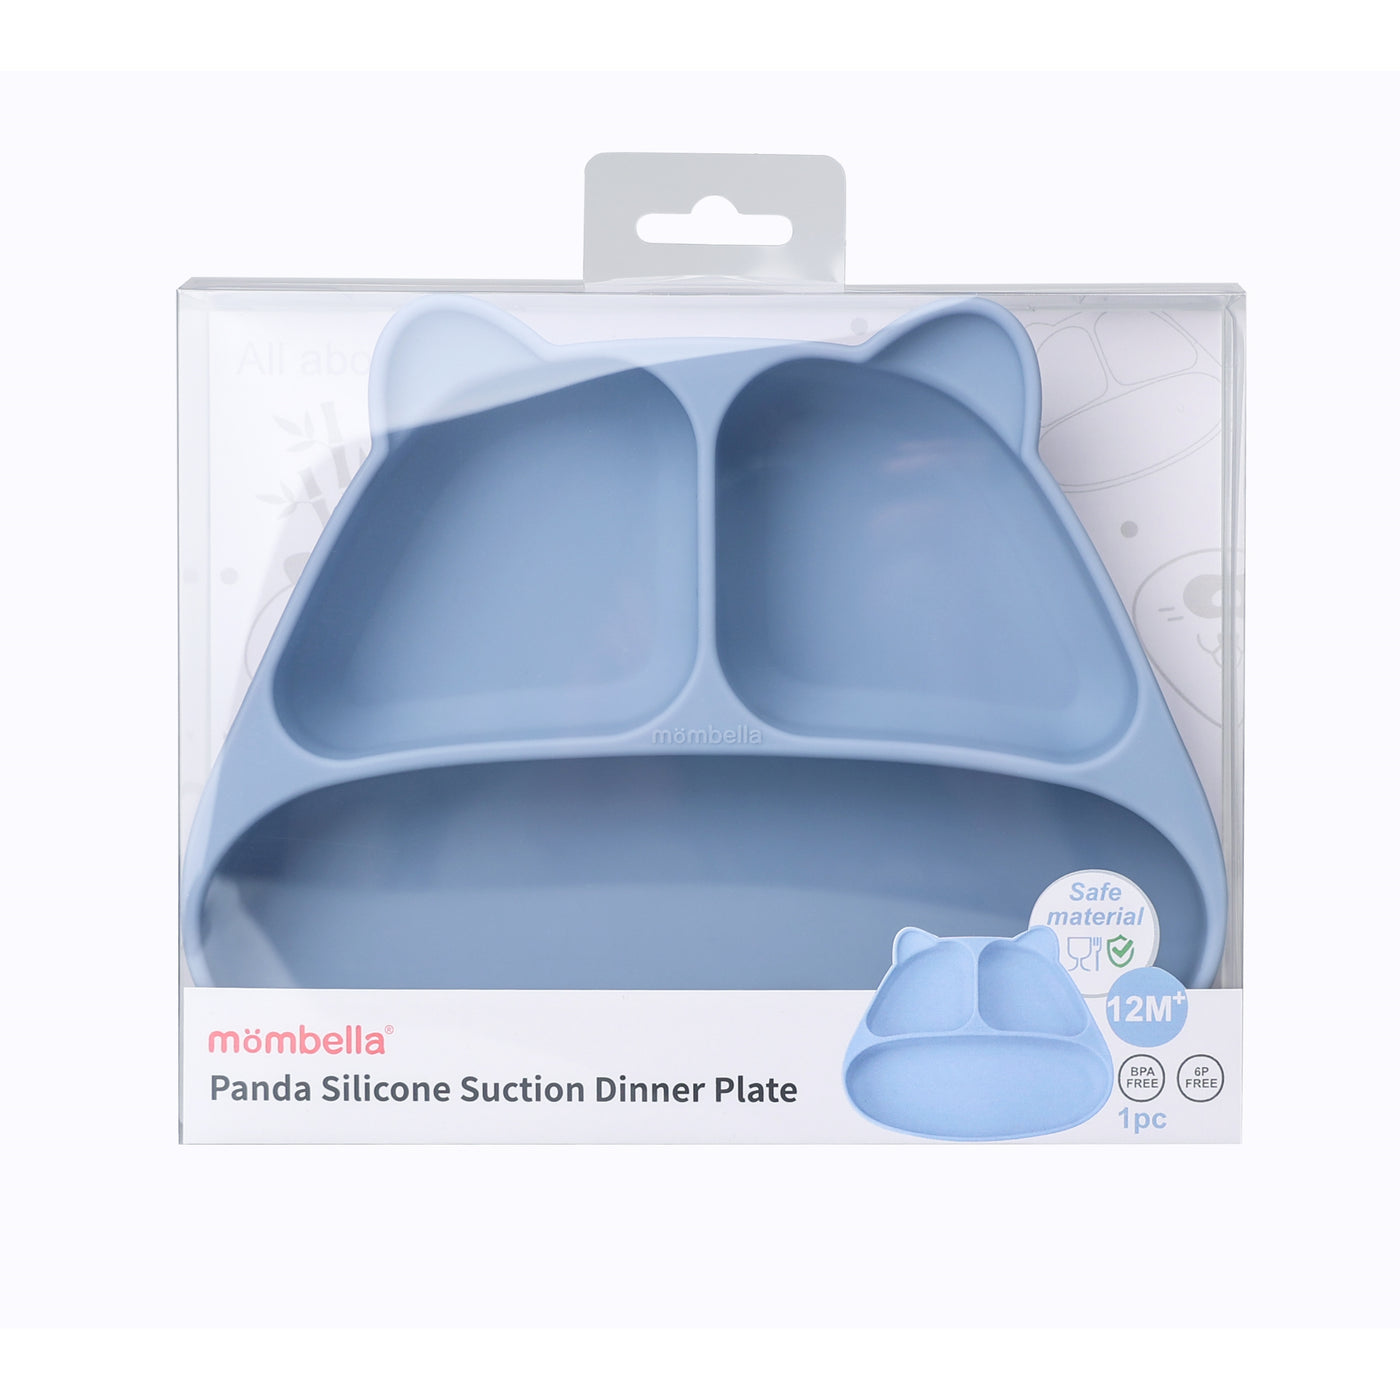 Panda Silicone Suction Dinner Plate - Light Blue